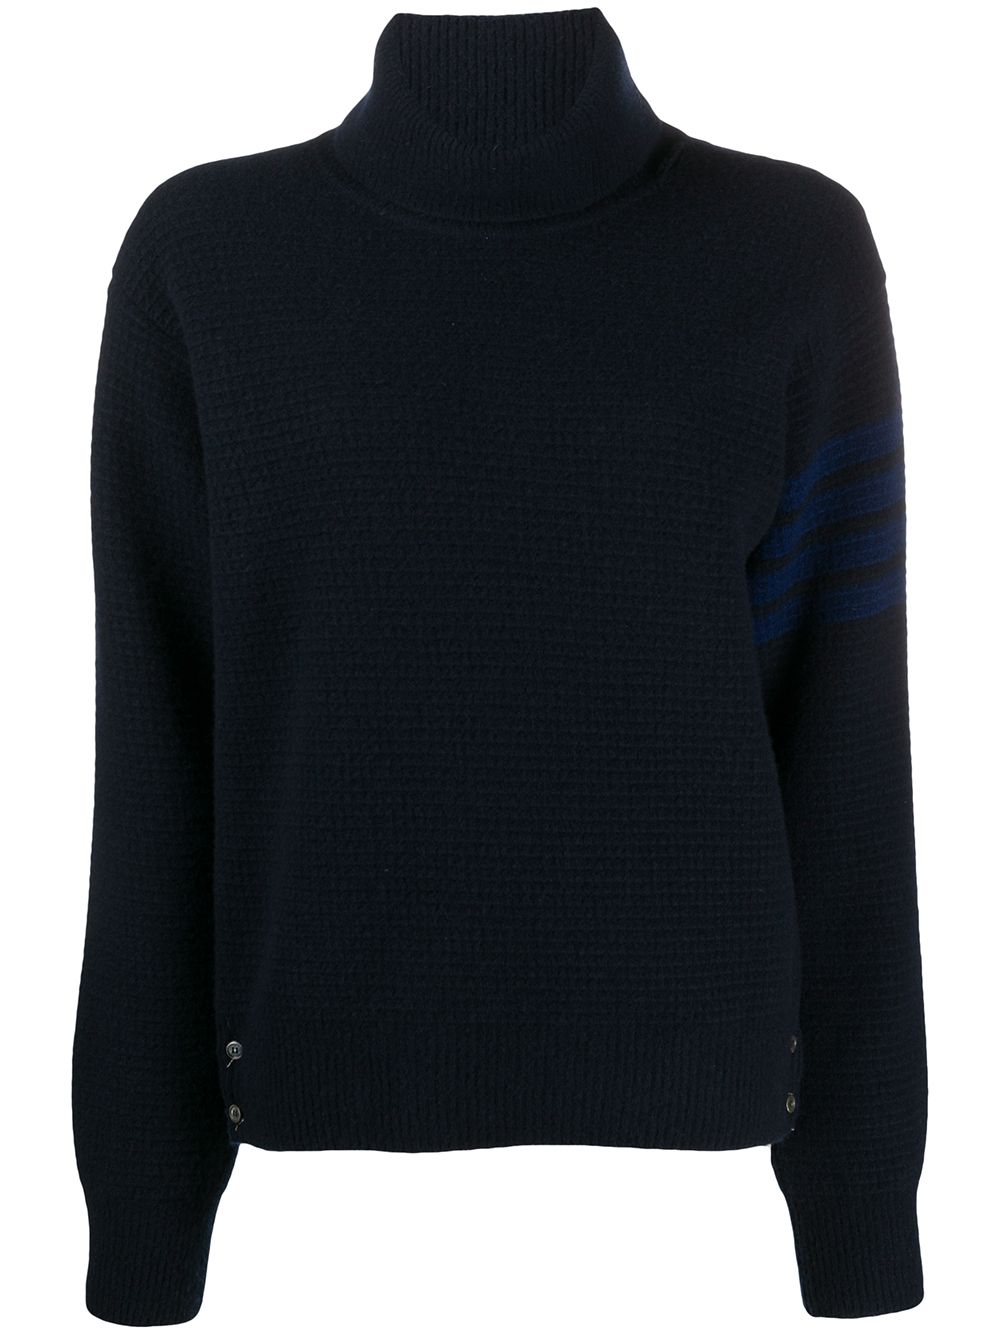 Image 1 of Thom Browne Pullover mit Waffelstrick-Muster